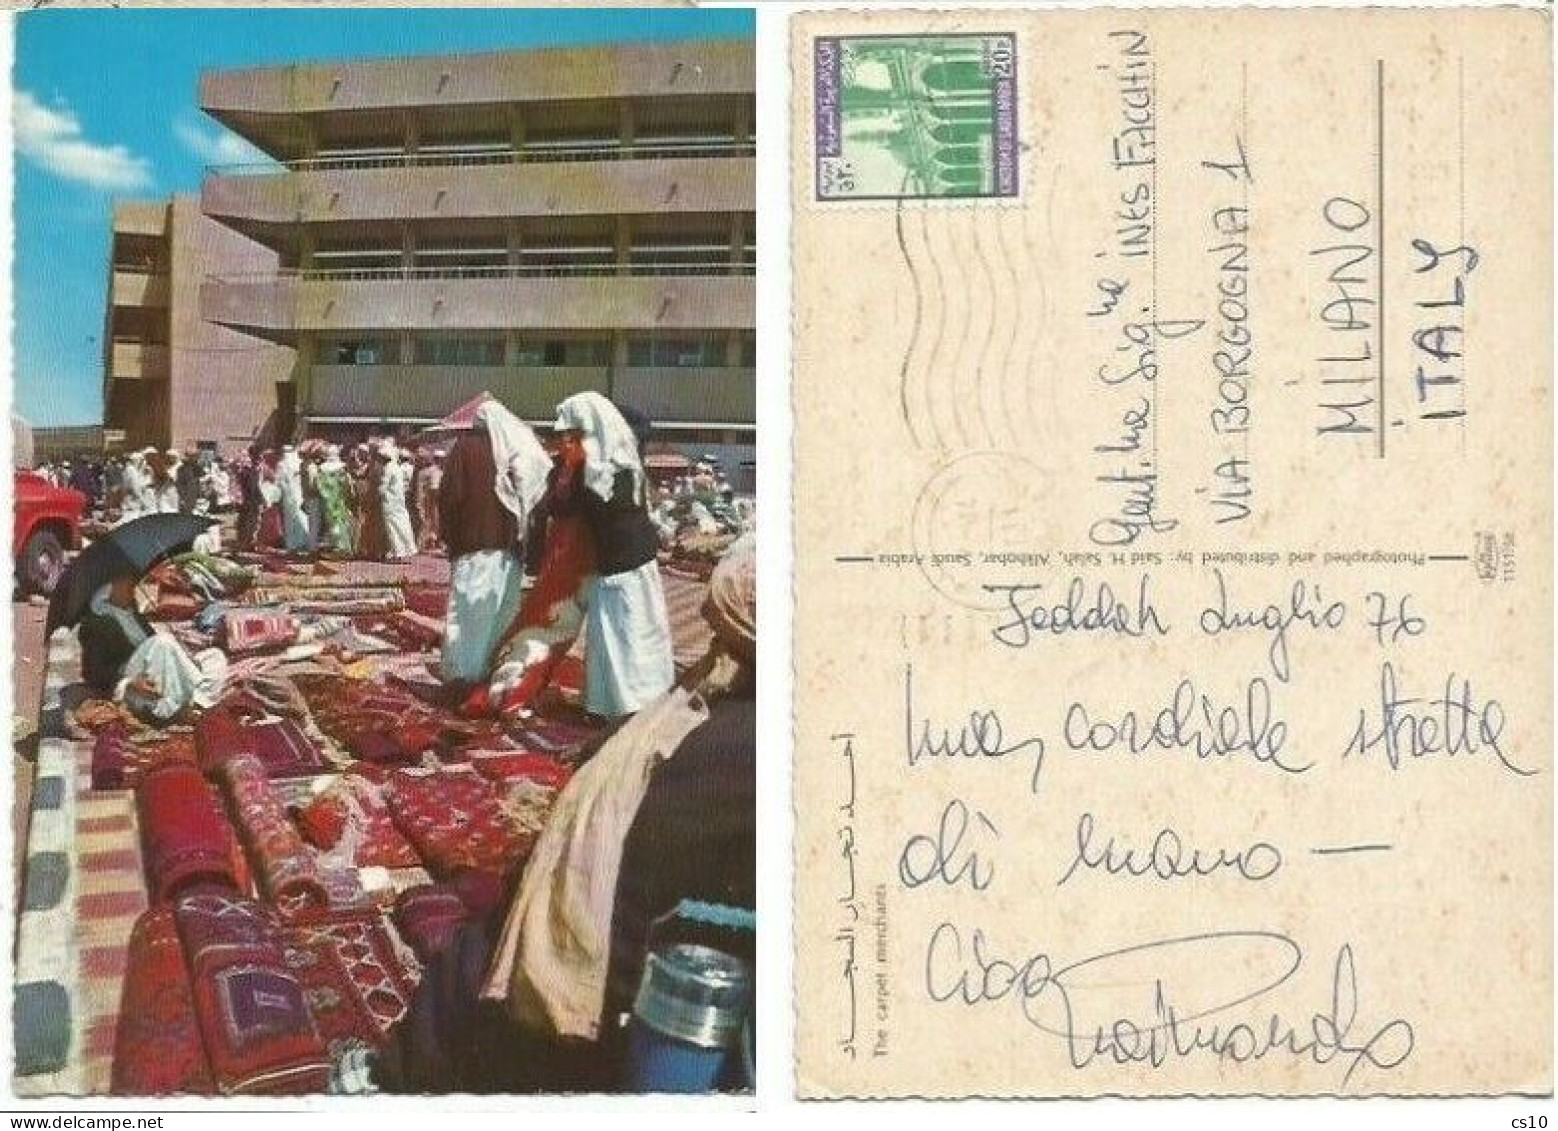 Saudi Arabia The Carpet Merchants - Pcard Jeddah July1976 X Italy With Regular Issue P.20 Solo Franking - Shopkeepers